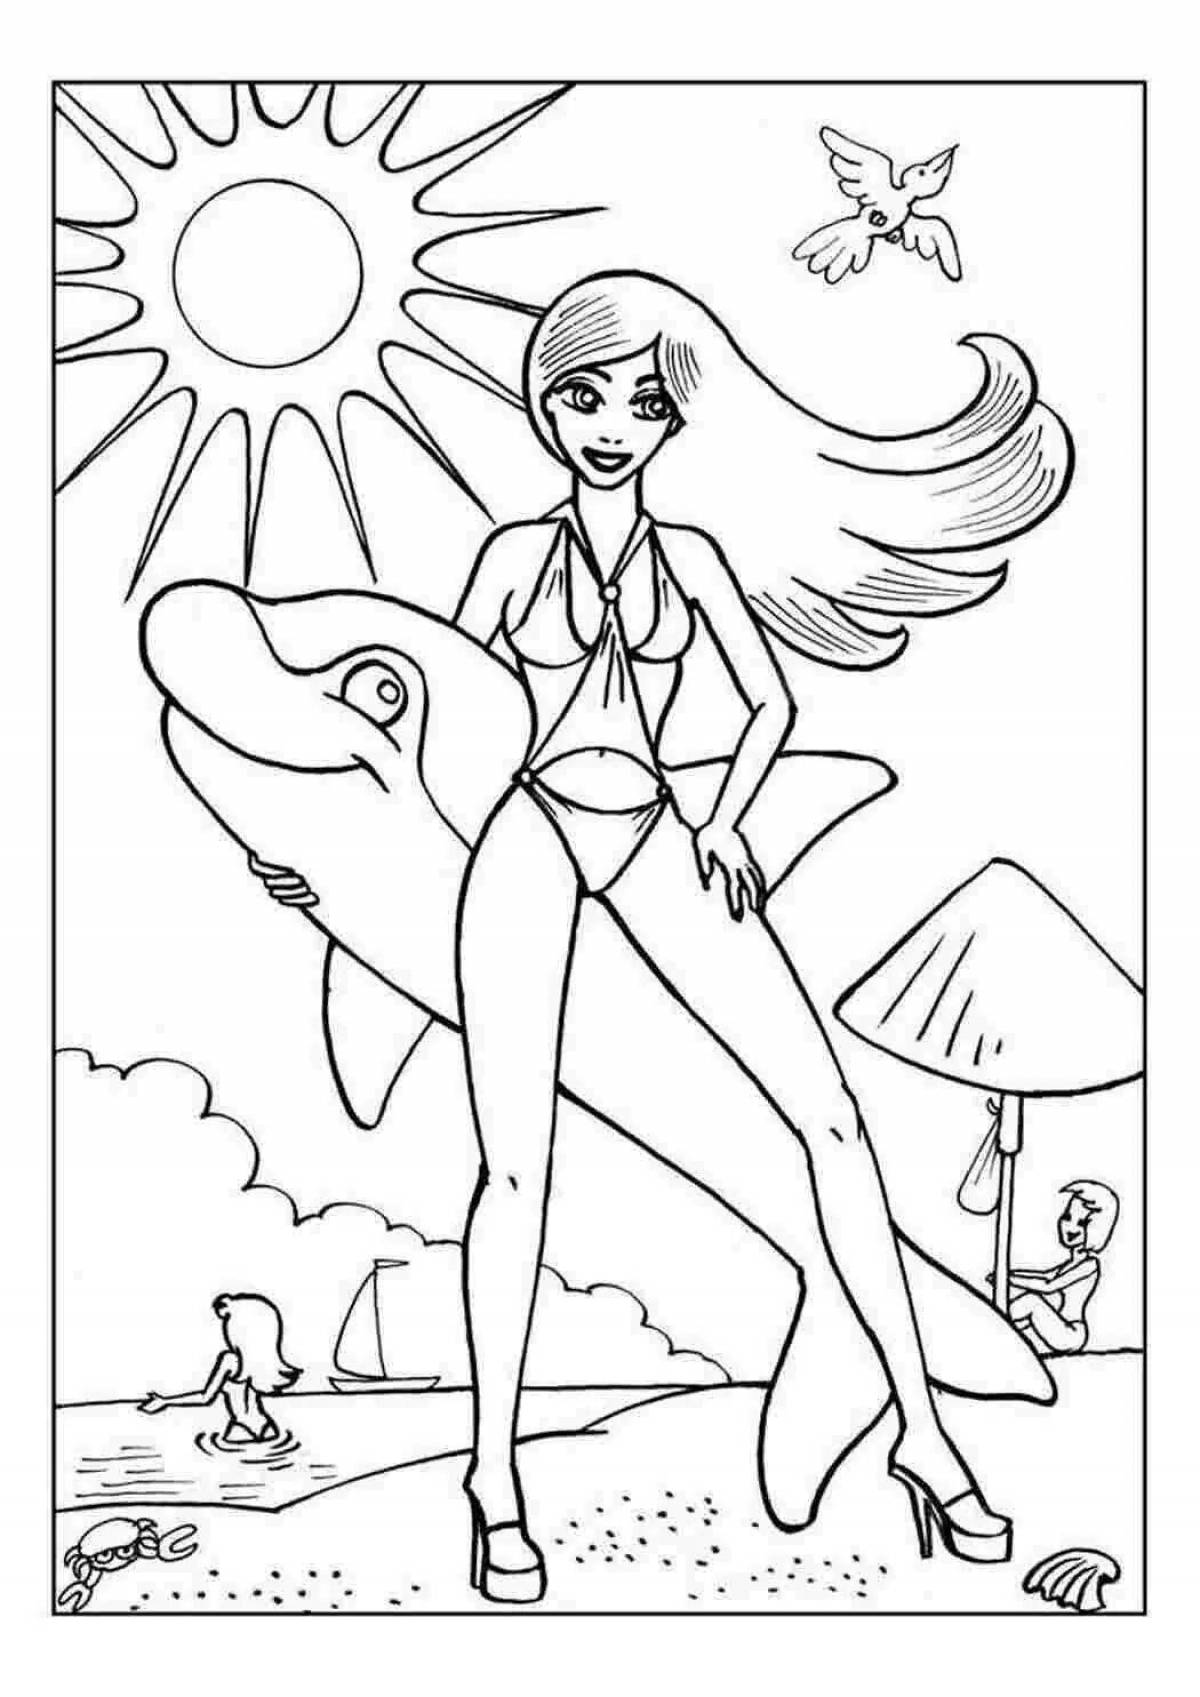 Exquisite barbie on beach coloring page